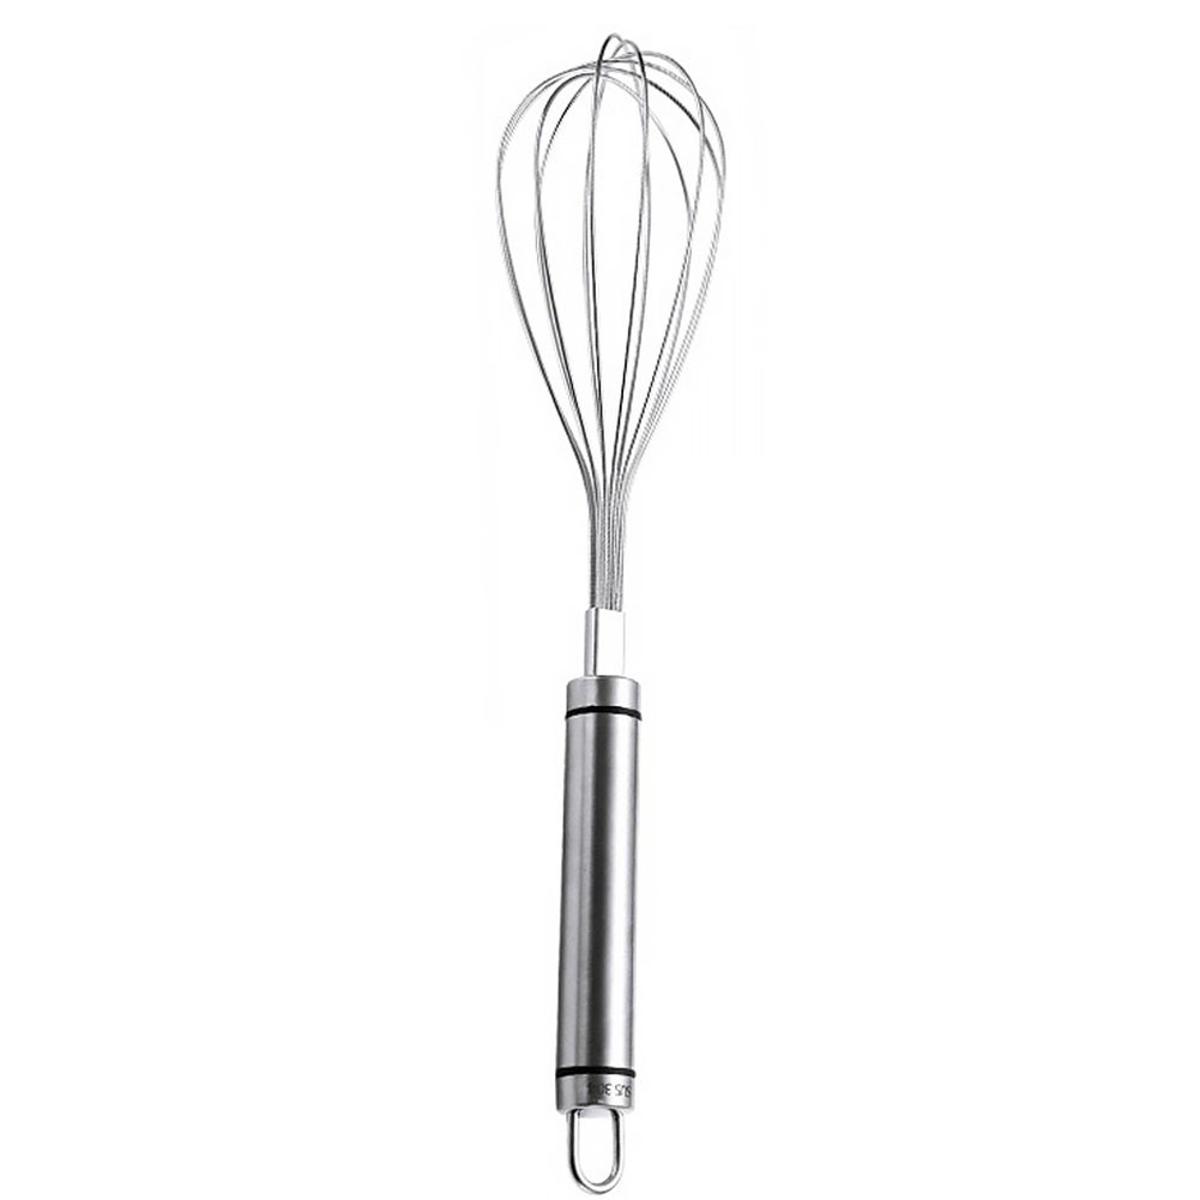 Home Kitchen Small Portable Handheld Mini Charging Battery Operated  Automatic Electric Hand Egg Cake Mixer Whisk Buy Portable Mini Hand Mixer/ electric Hand Mixer,Electric Whisk/automatic Egg Whisk/battery Operated  Mixer,Handheld Whisk/small Whisk ...